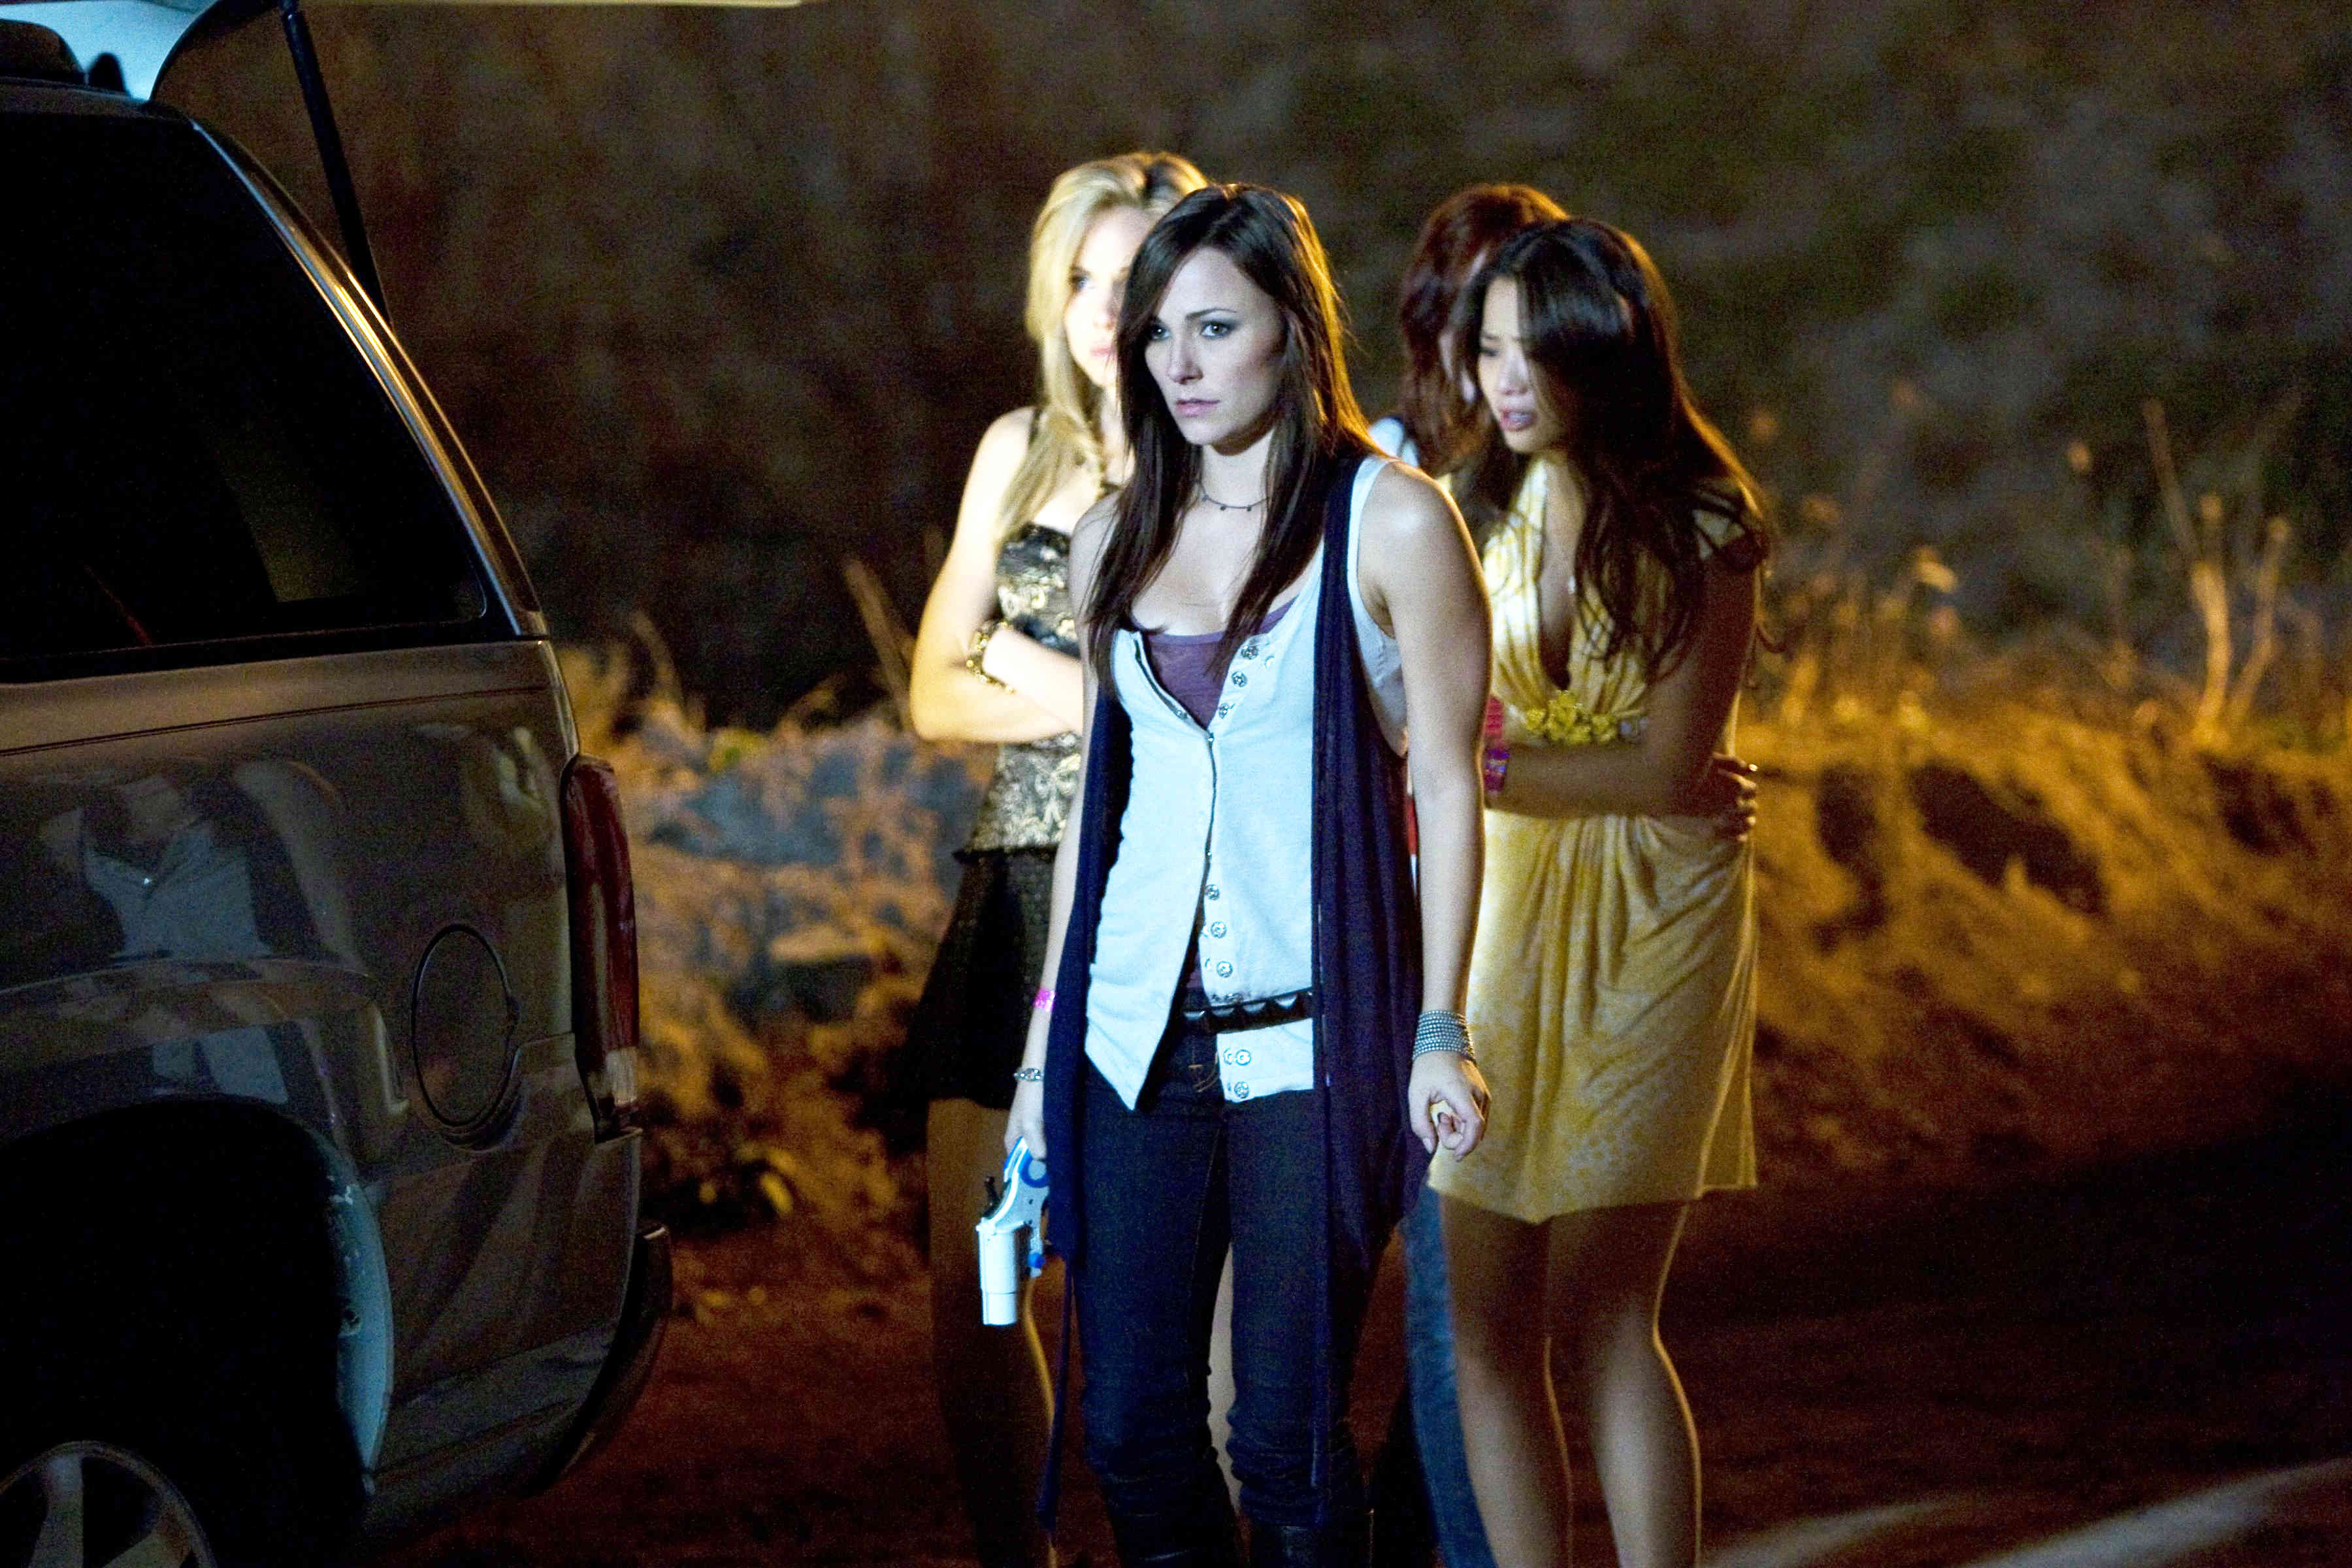 Leah Pipes, Briana Evigan, Rumer Willis and Jamie Chung in Summit Entertainment's Sorority Row (2009)